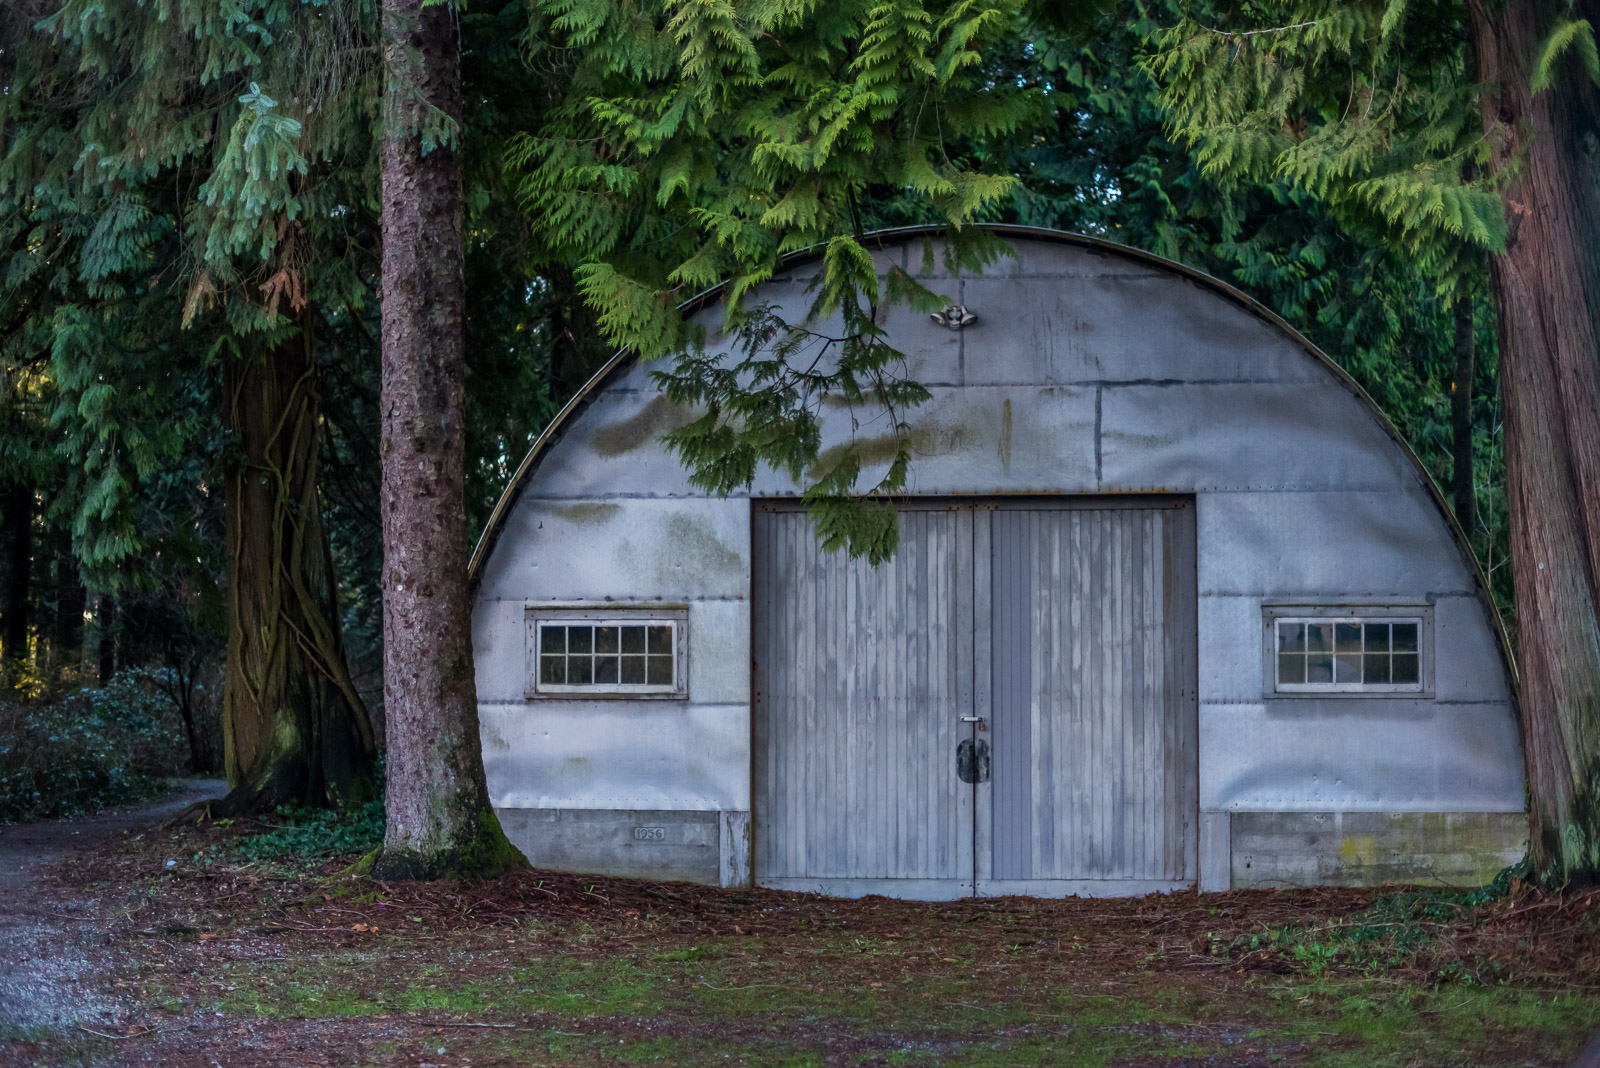 The Quonset hut